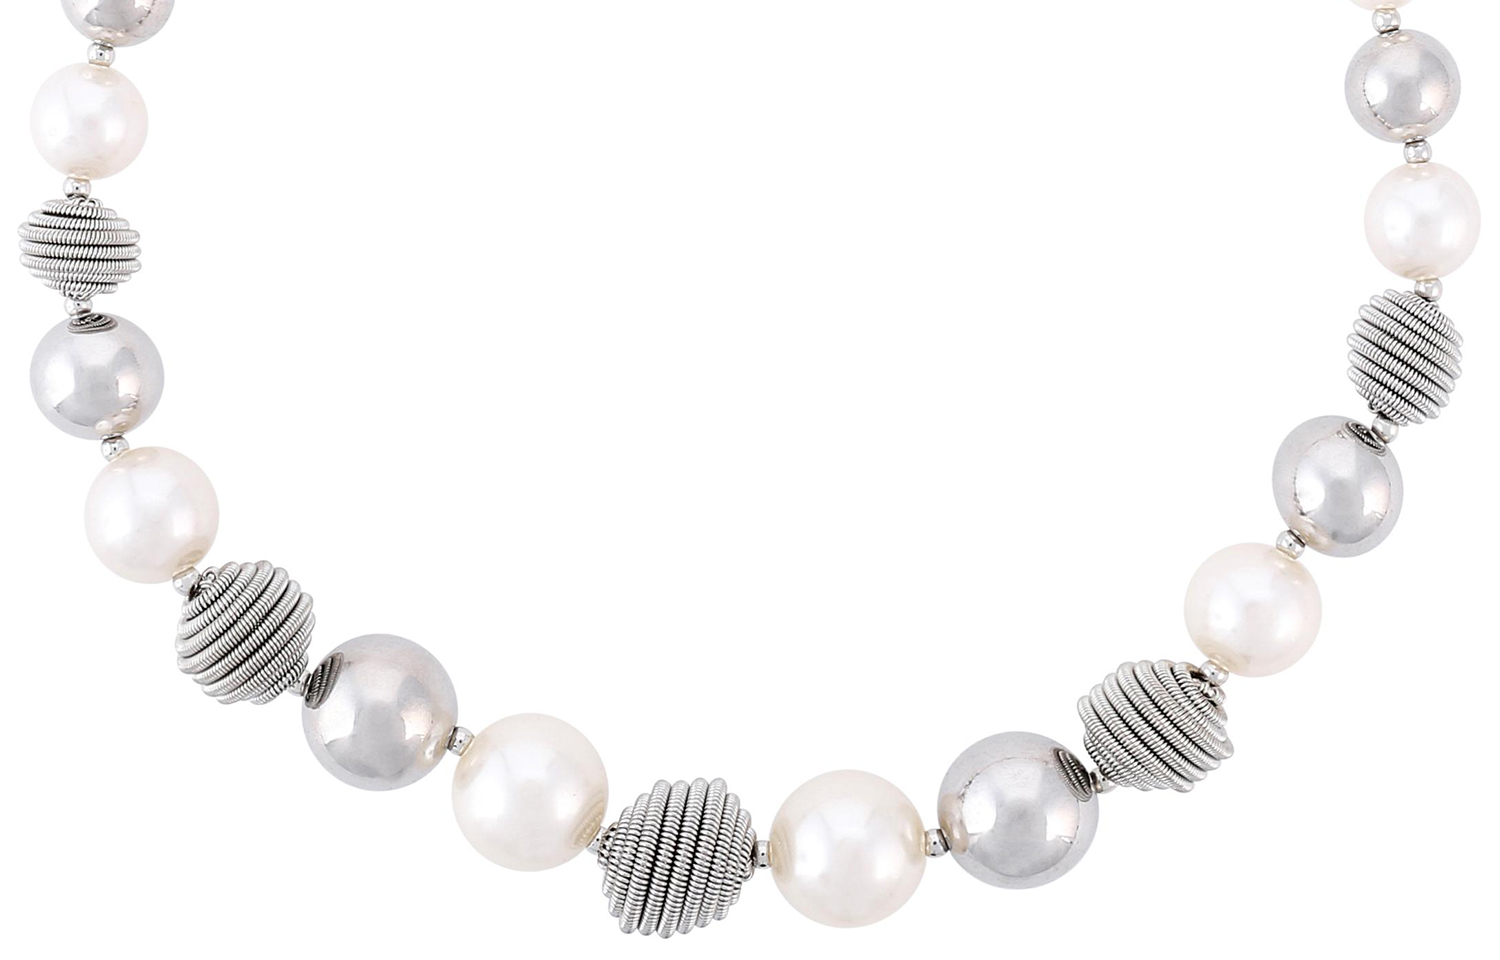 Necklace - Silver Pearls